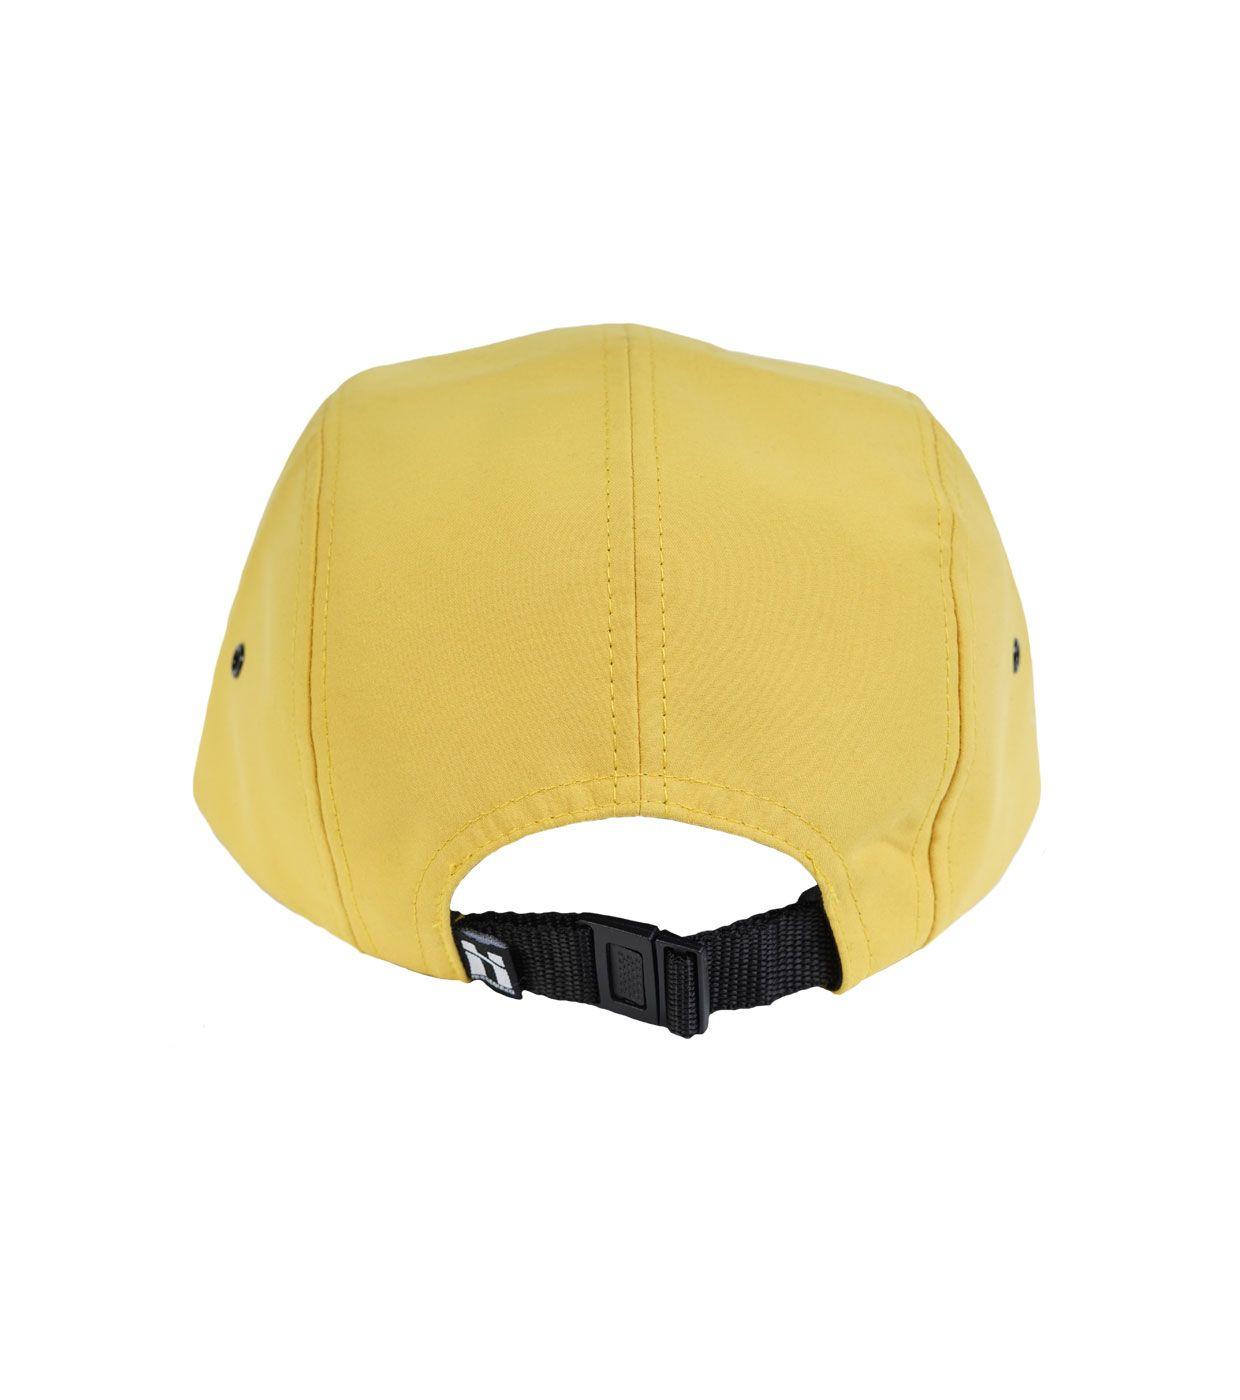 Black with a Dot of Yellow I Logo - Mr. Serious fat cap series, Yellow super fat cap. Yellow 5 panel